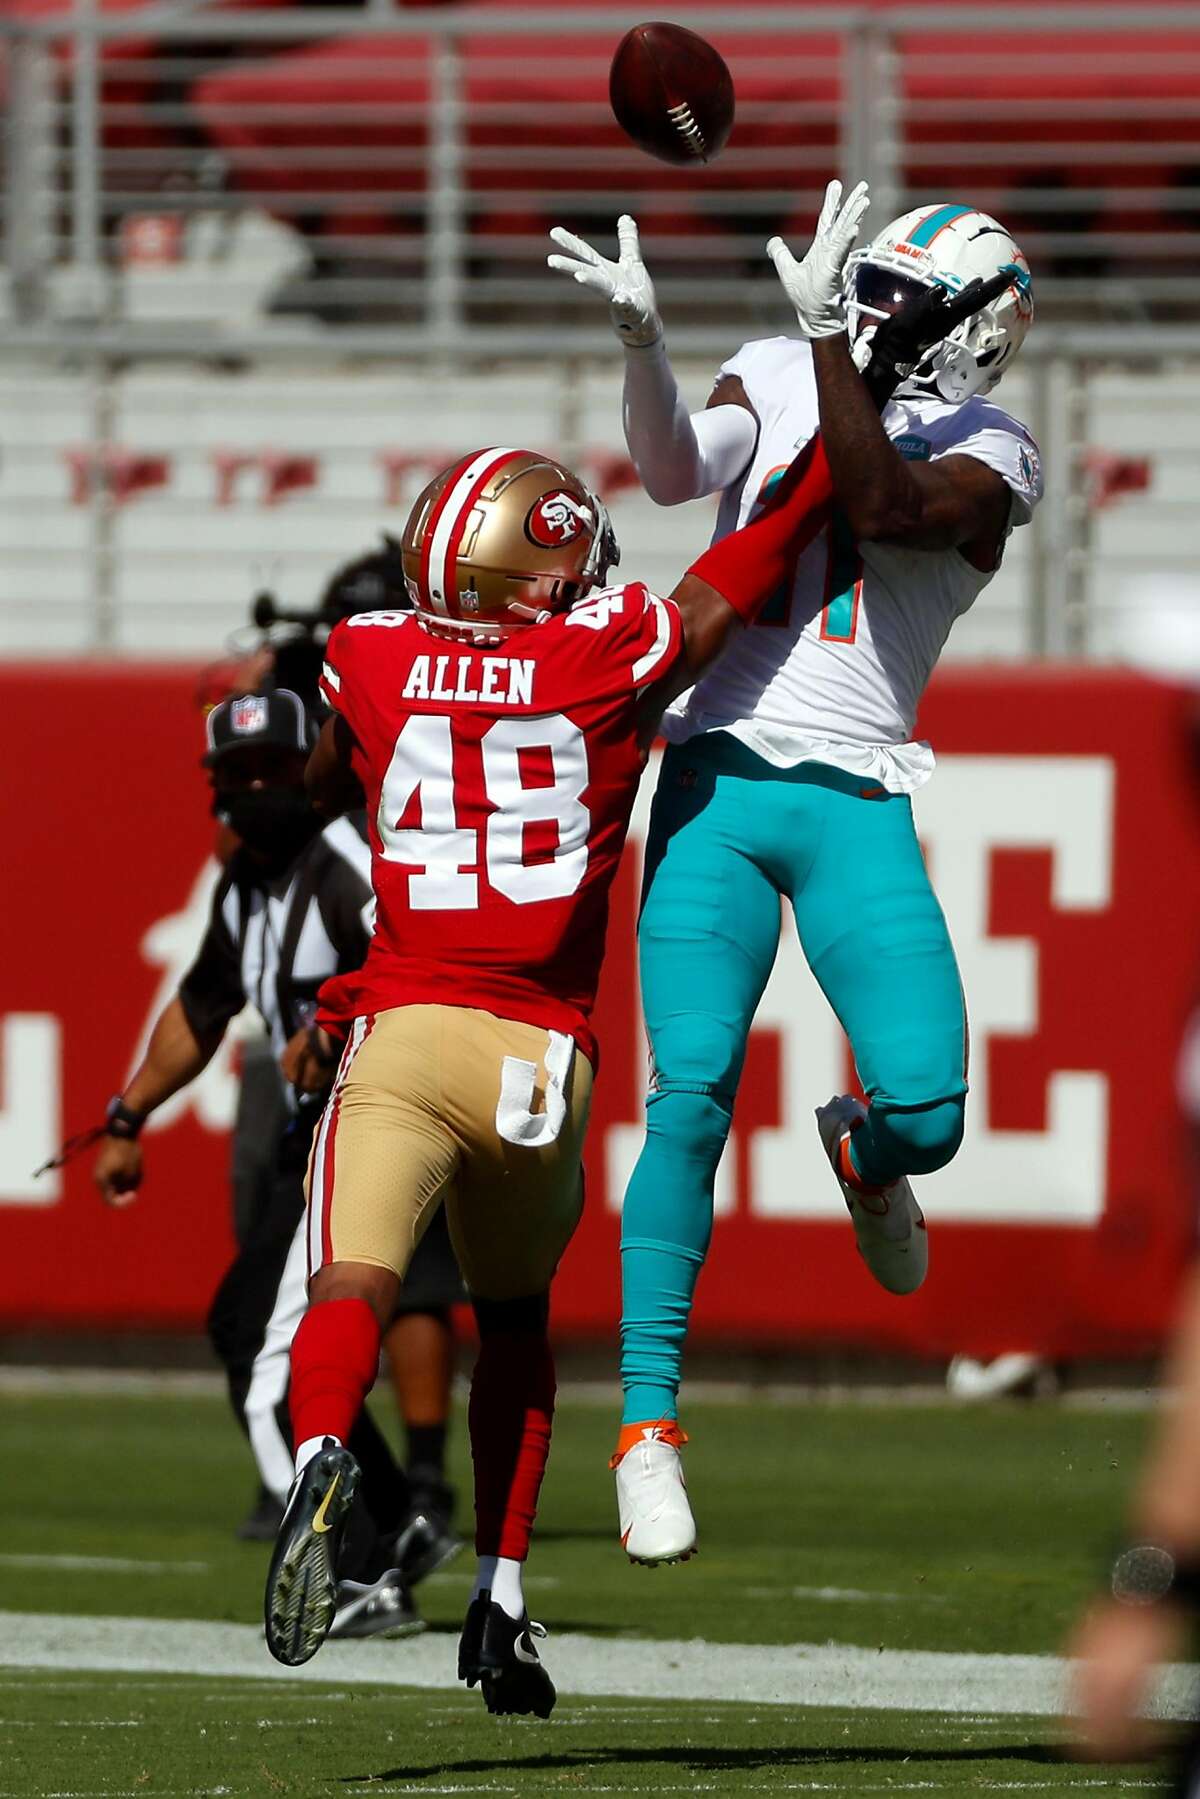 San Francisco 49ers' Brain Allen can't stop a catch by Miami Dolphins' DeVante Parker in 1st quarter during NFL game at Levi's Stadium in Santa Clara, Calif., on Sunday, October 11, 2020.